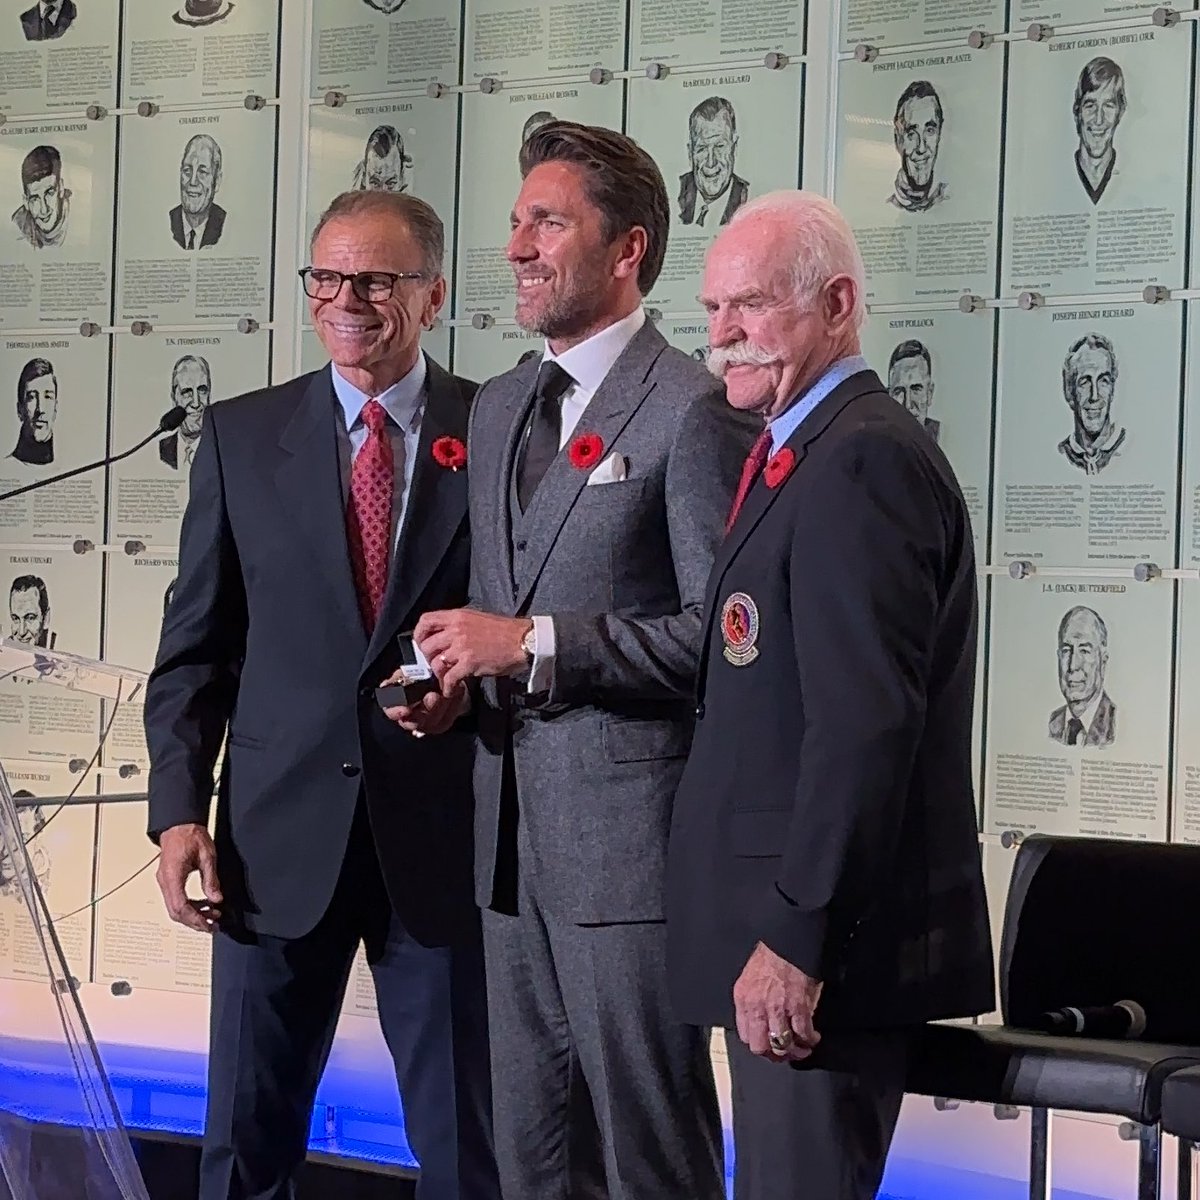 Henrik Lundqvist receives his Honoured Member Ring by @BaronRings from Mike Gartner #HHOF2001, Chair of the Selection Committee and Lanny McDonald #HHOF1992, Chair of the Board

#HHOF2023 | #HHOF